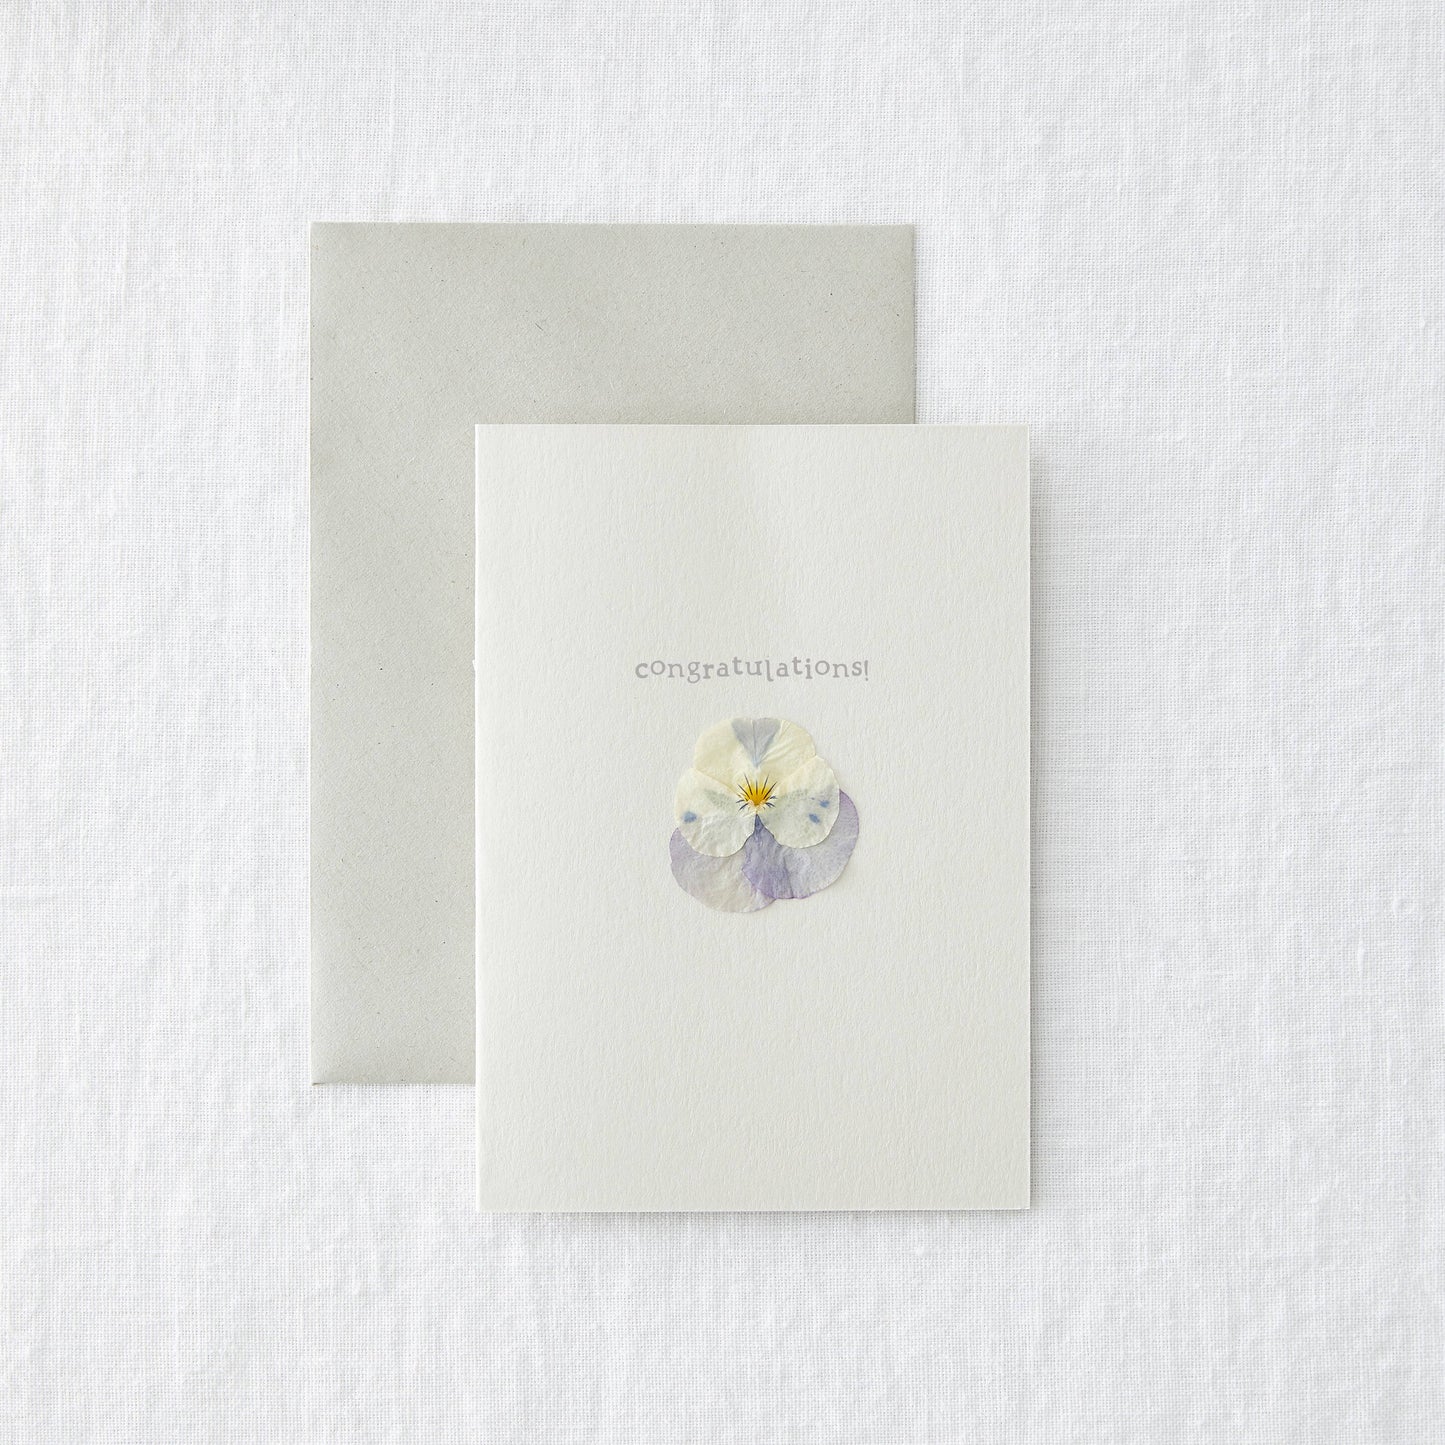 Congratulations - Pressed Pansy Flower Card